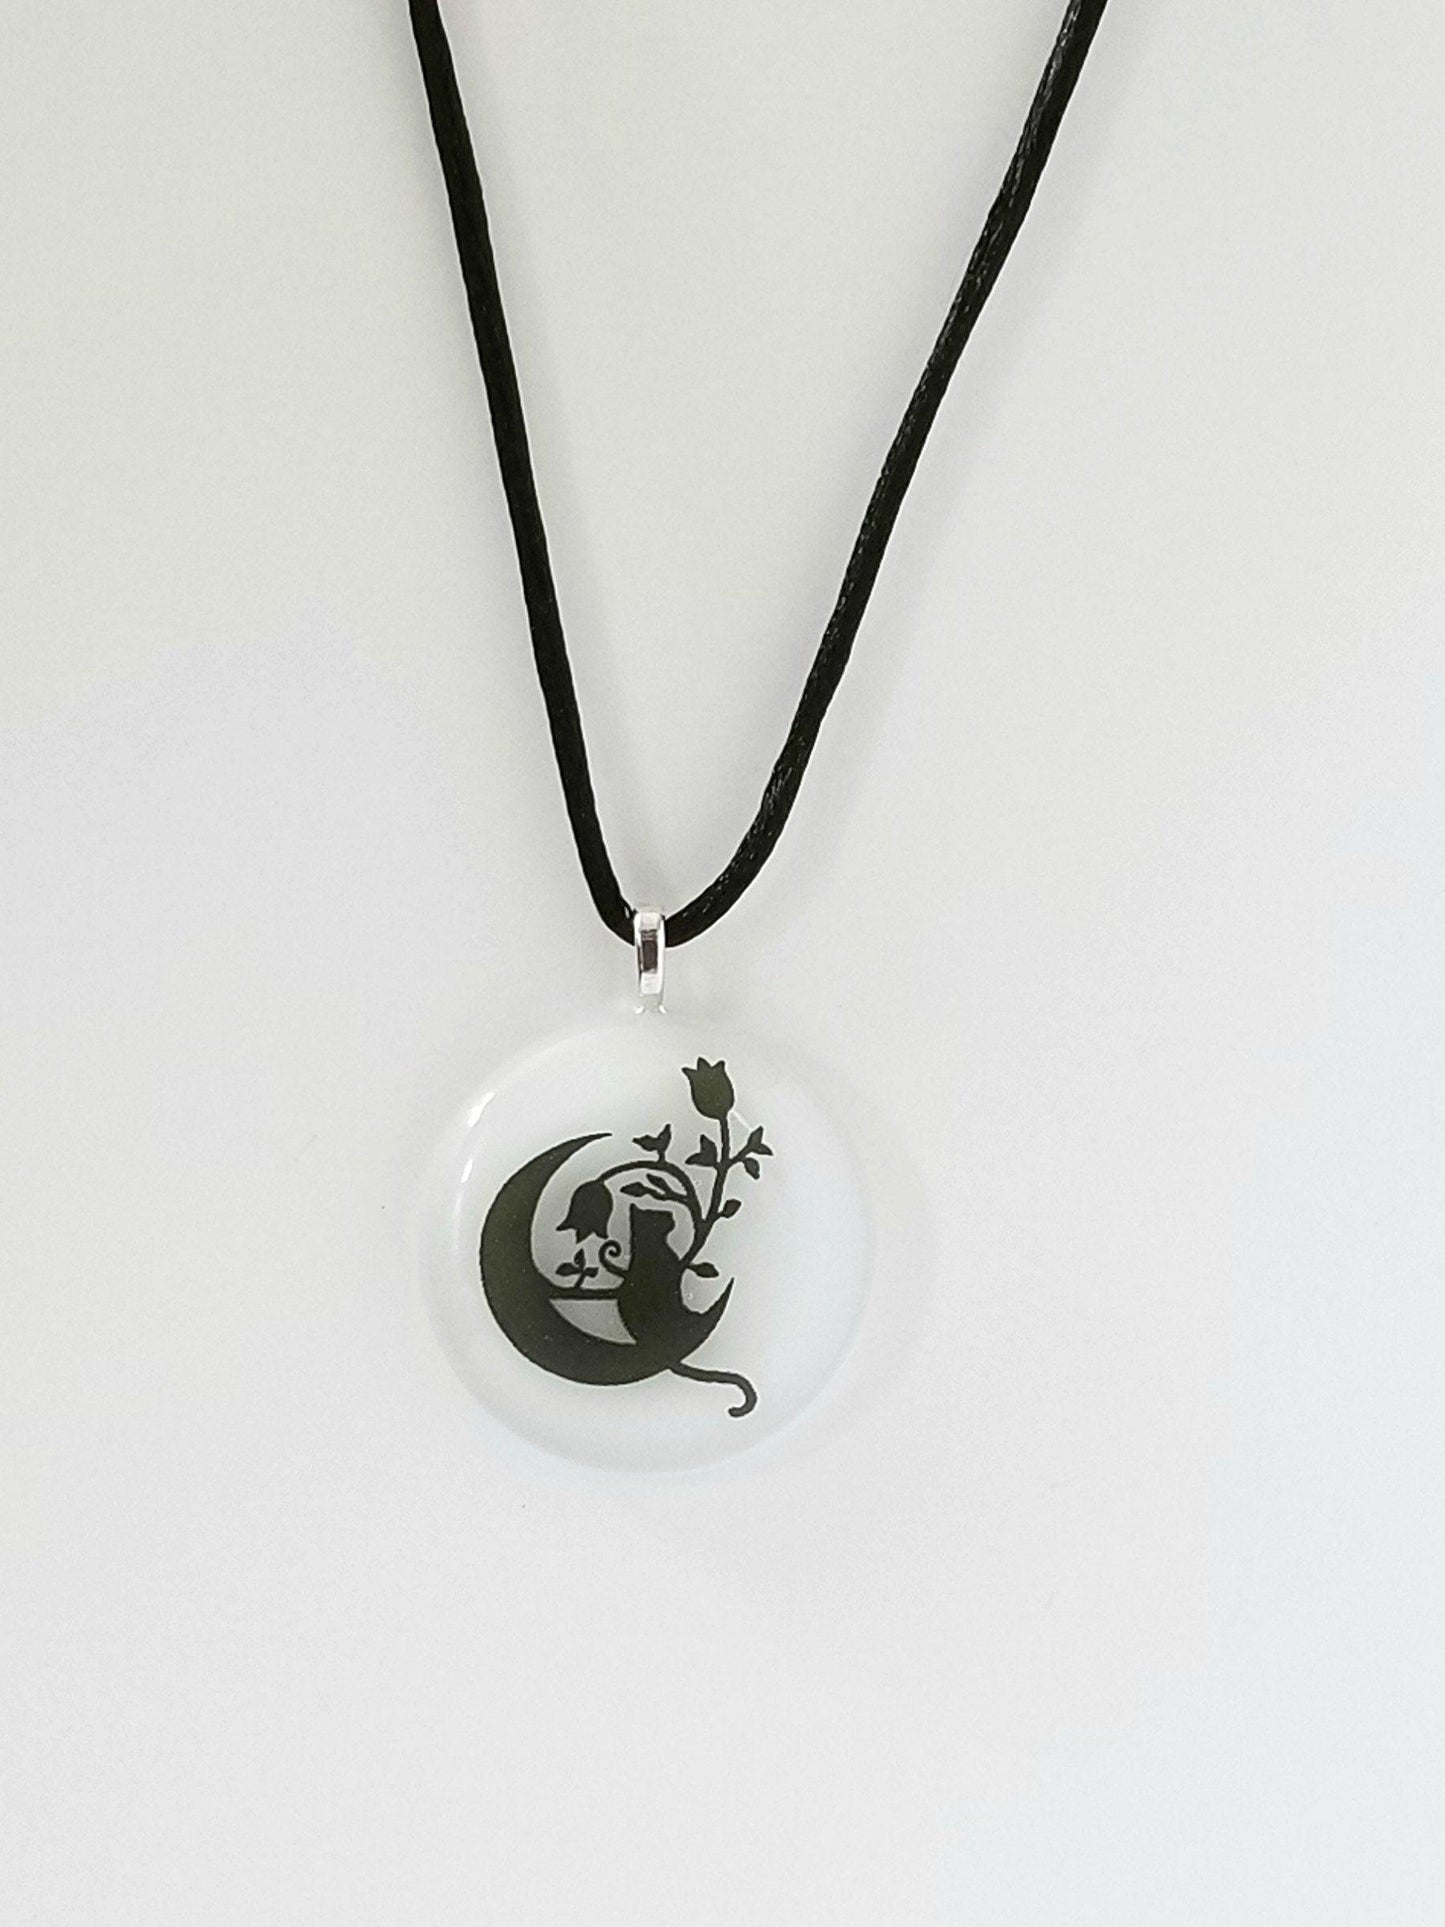 Black Cat sitting on the Moon on White Circle  Fused Glass Pendant